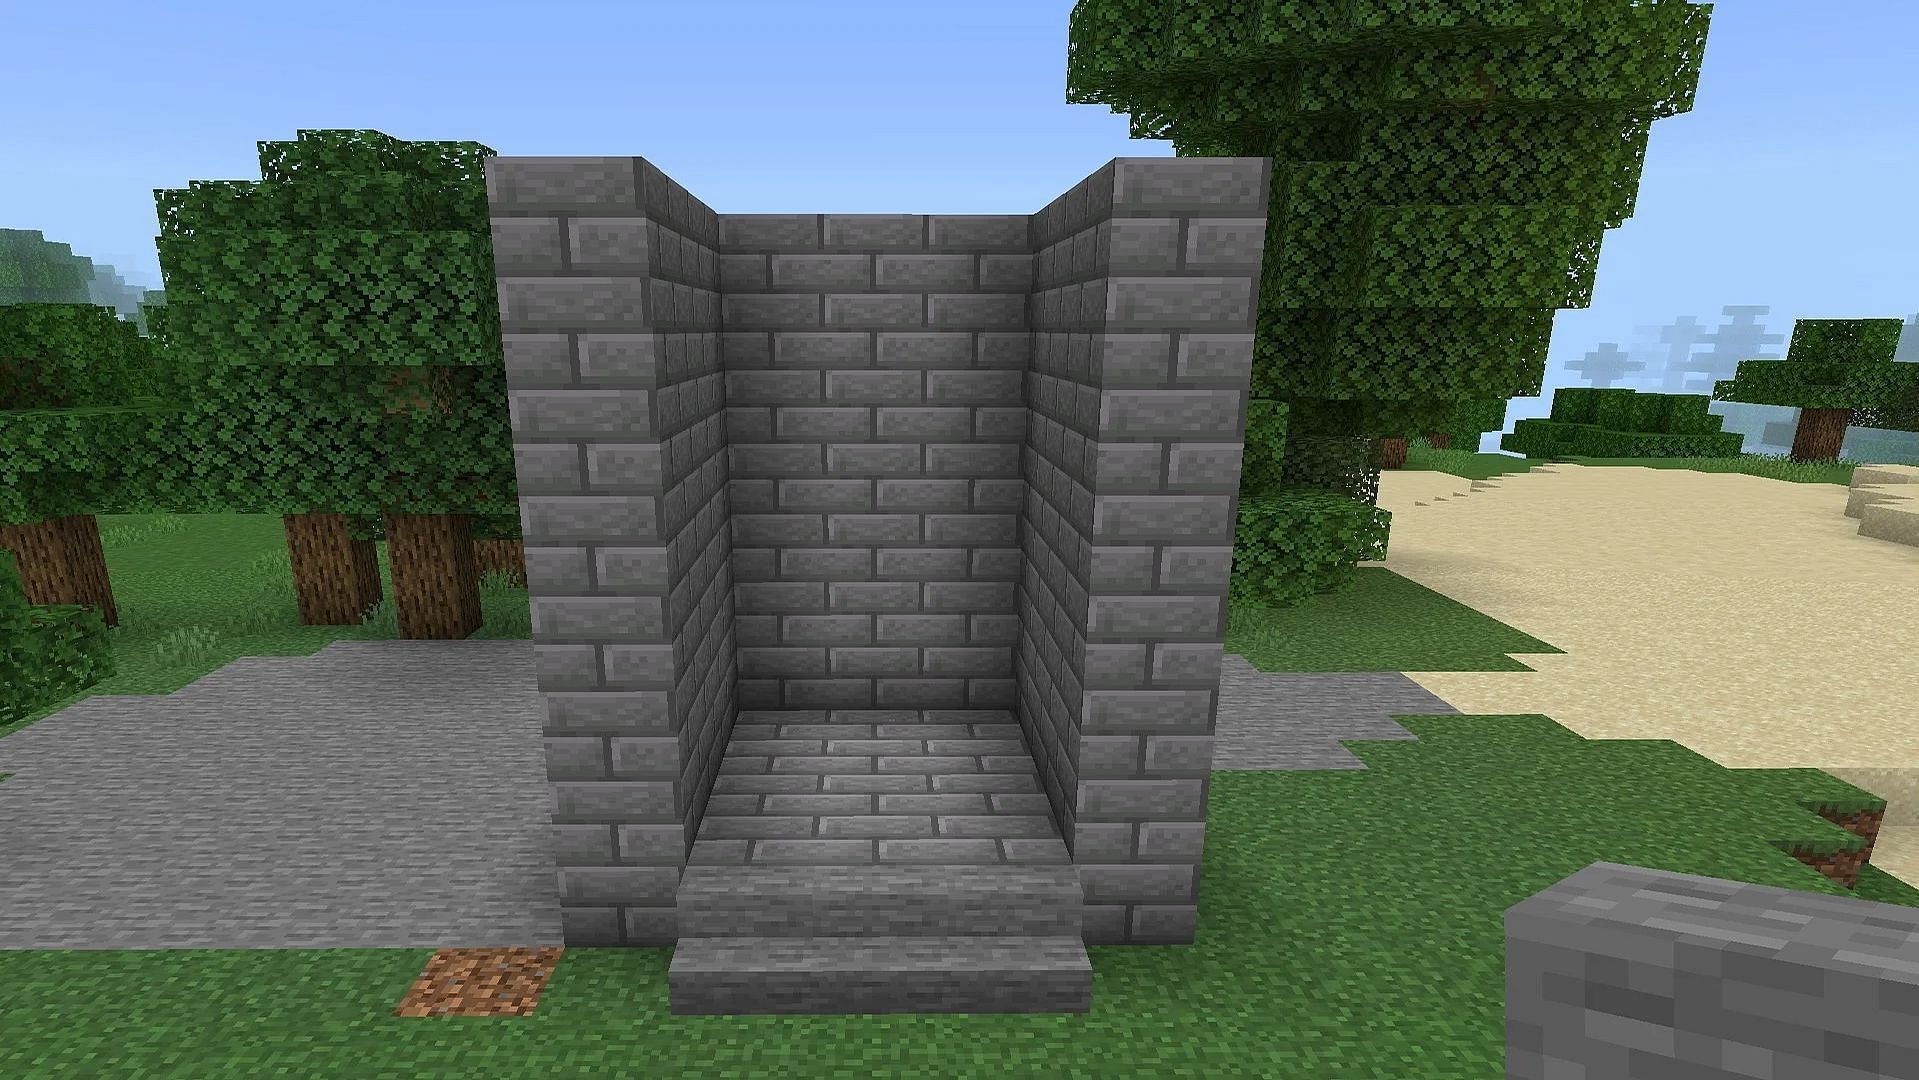 Support structure for spiral staircase (Image via Mojang)